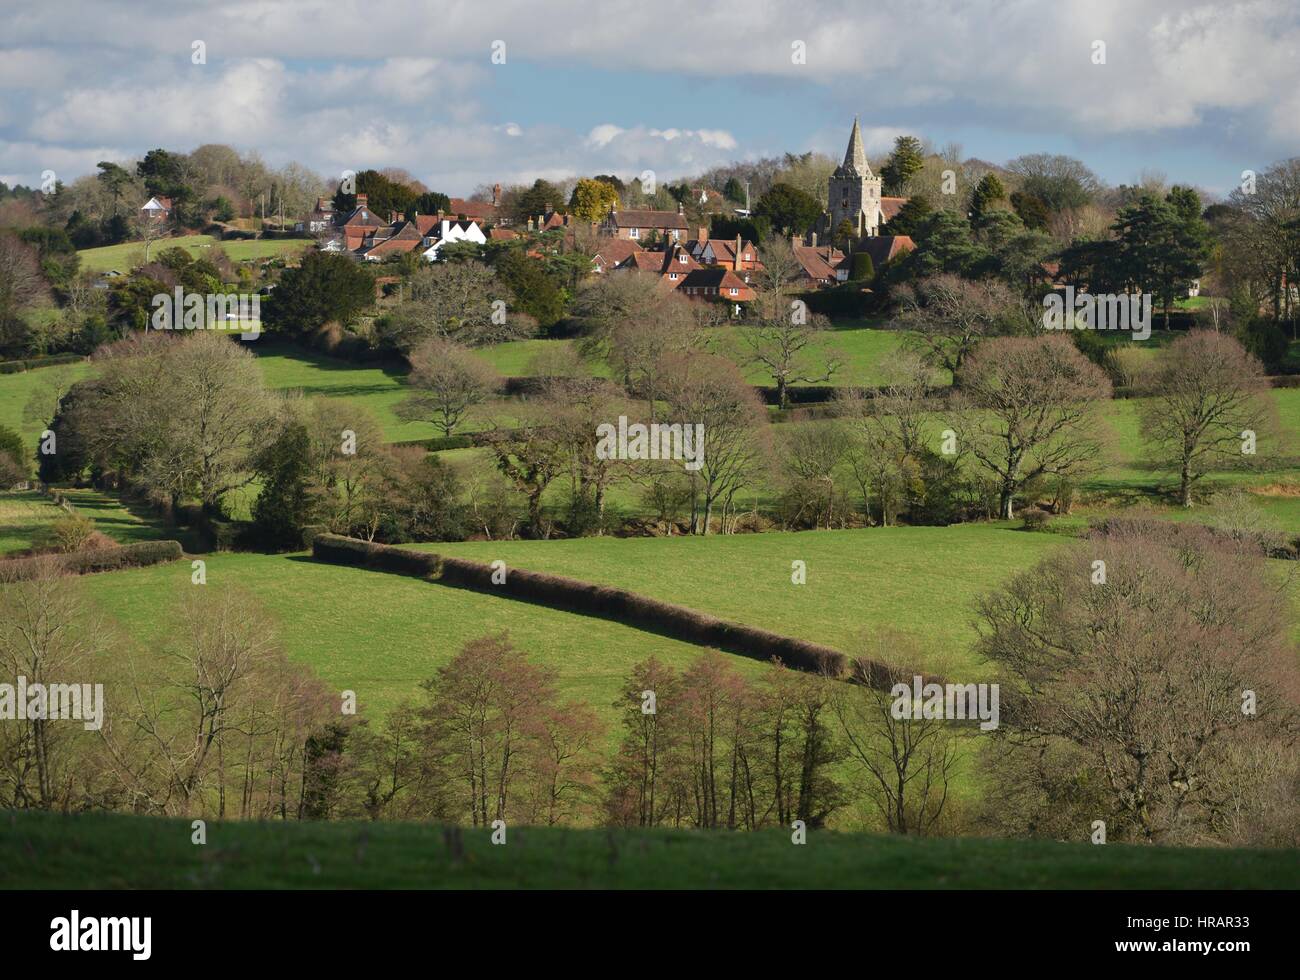 Dallington, East Sussex, UK 28th February 2017. Bright sunshine and blue sly over the pretty hill top village of Dallington, East Sussex, UK. Credit: Peter Cripps/Alamy Live News Stock Photo